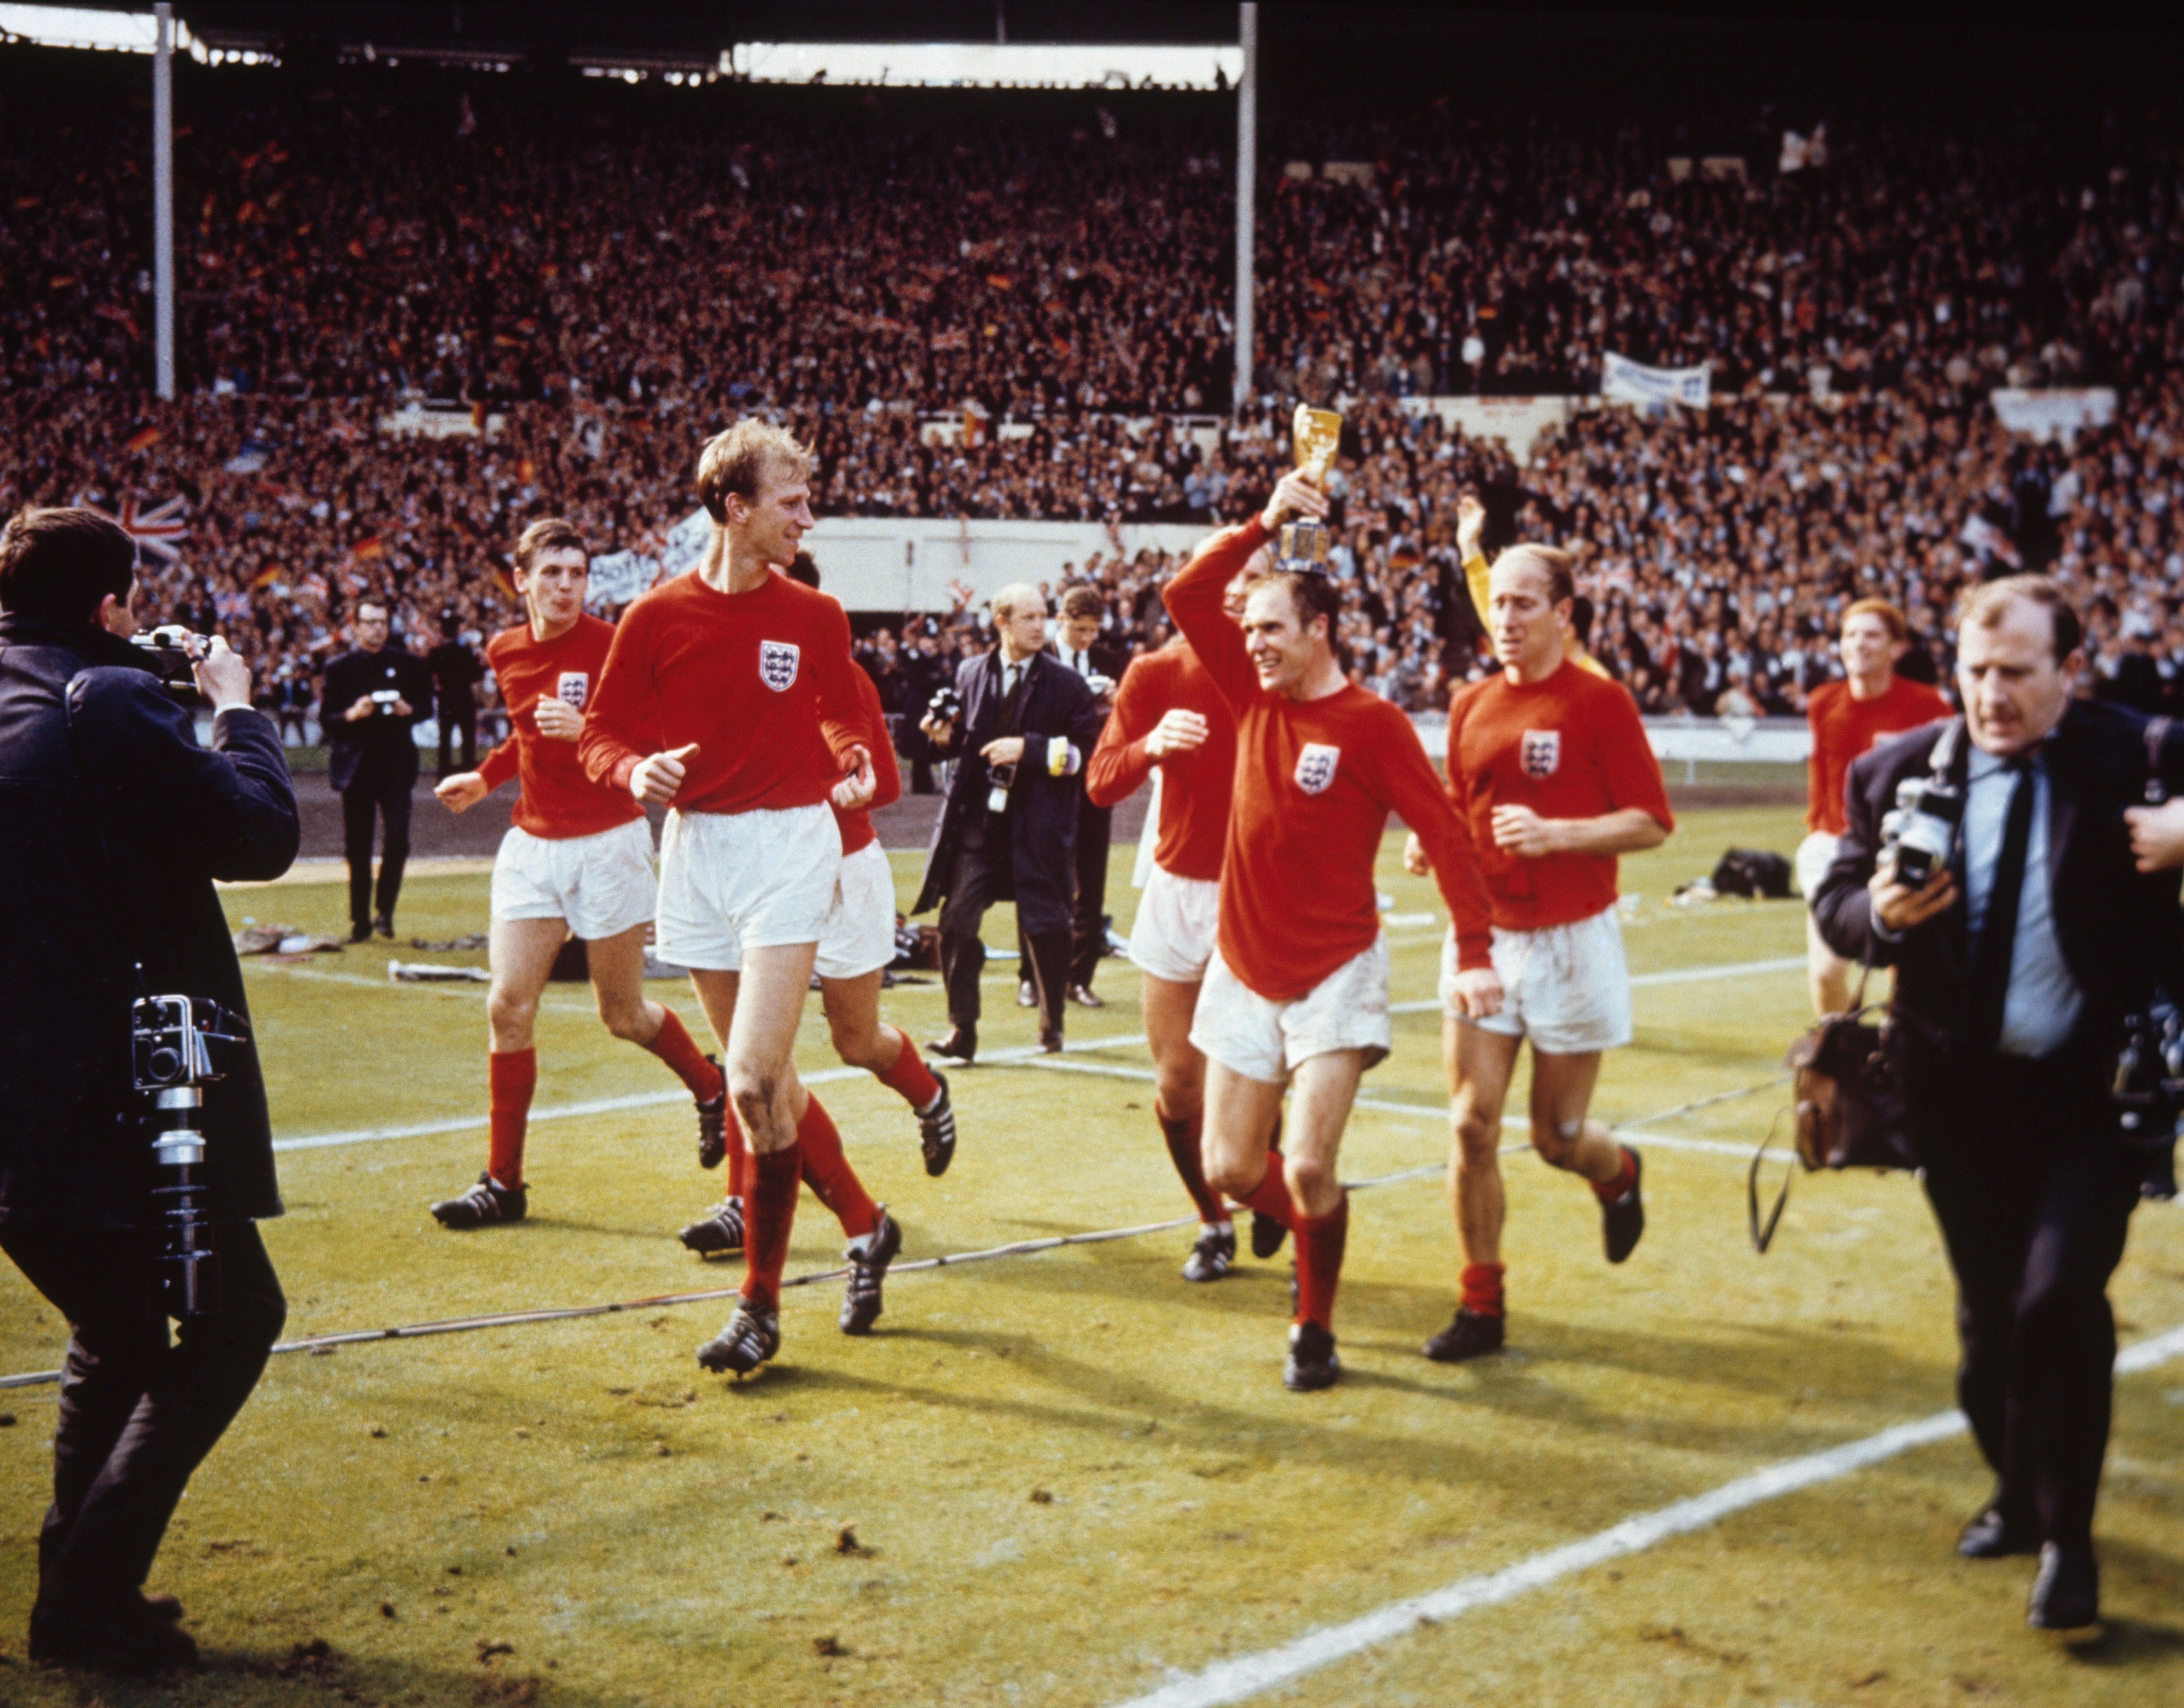 Enjoying a lap of honour as world champions in July 1966